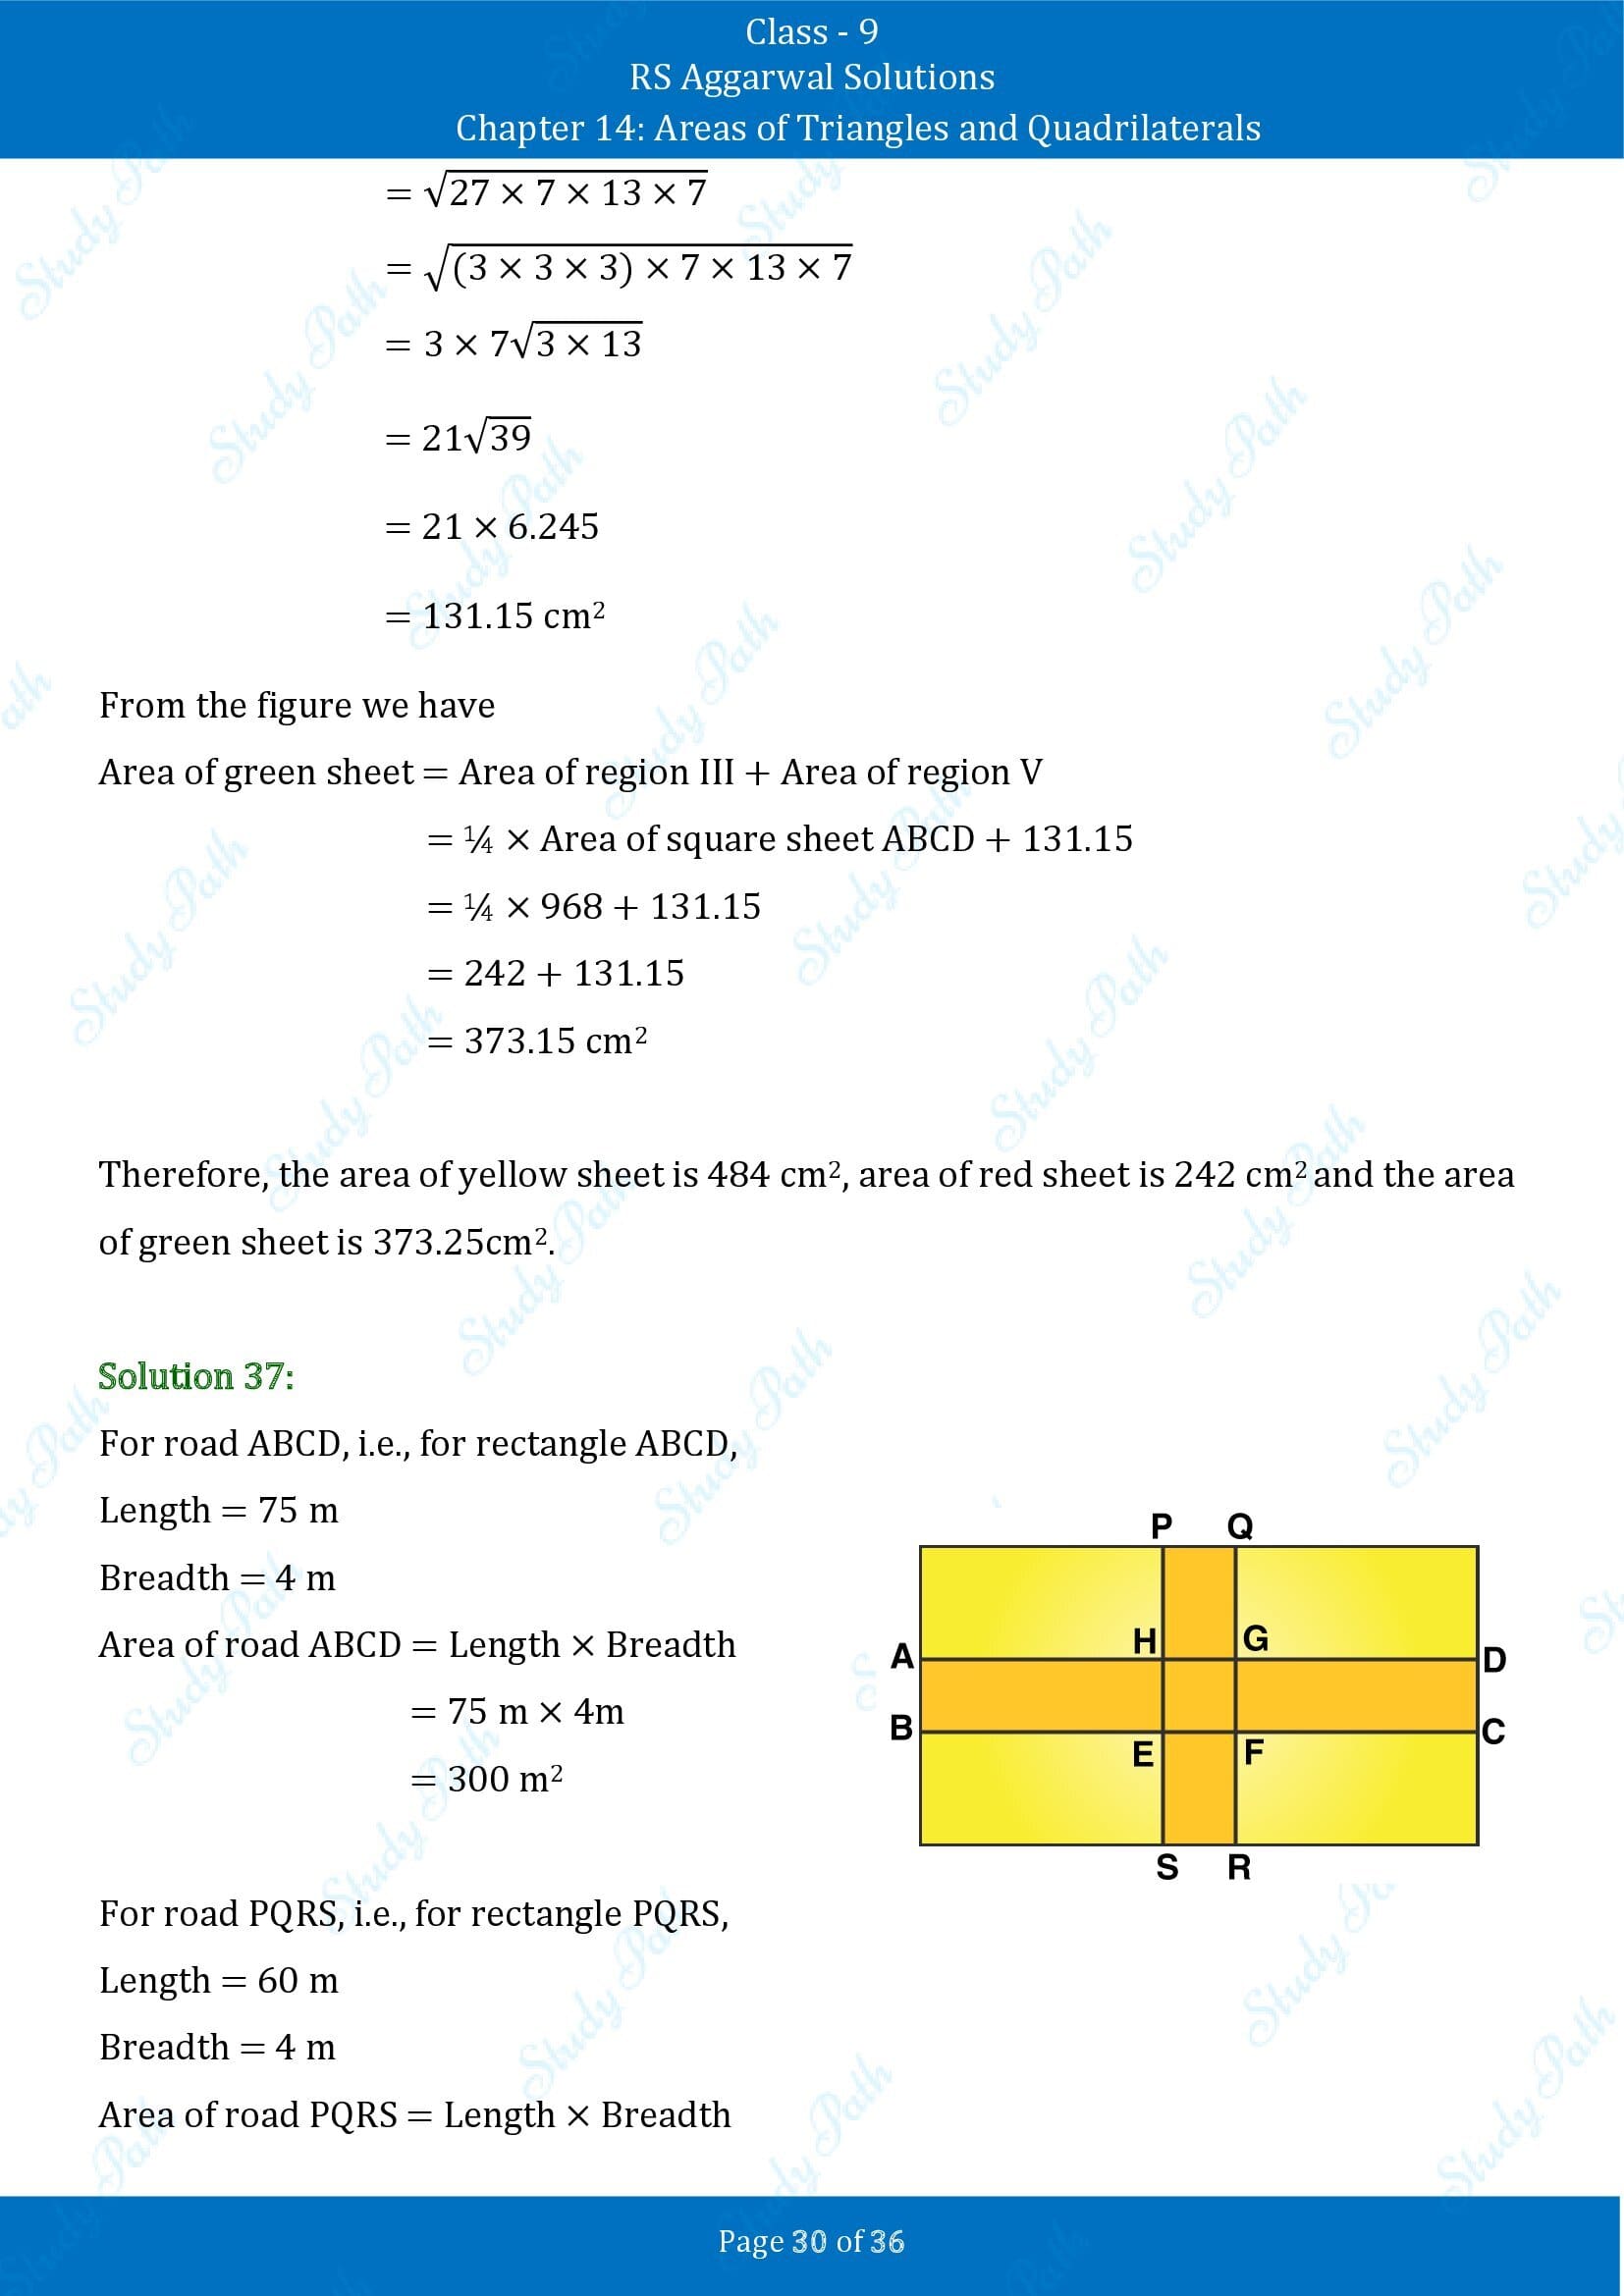 RS Aggarwal Solutions Class 9 Chapter 14 Areas of Triangles and Quadrilaterals Exercise 14 00030